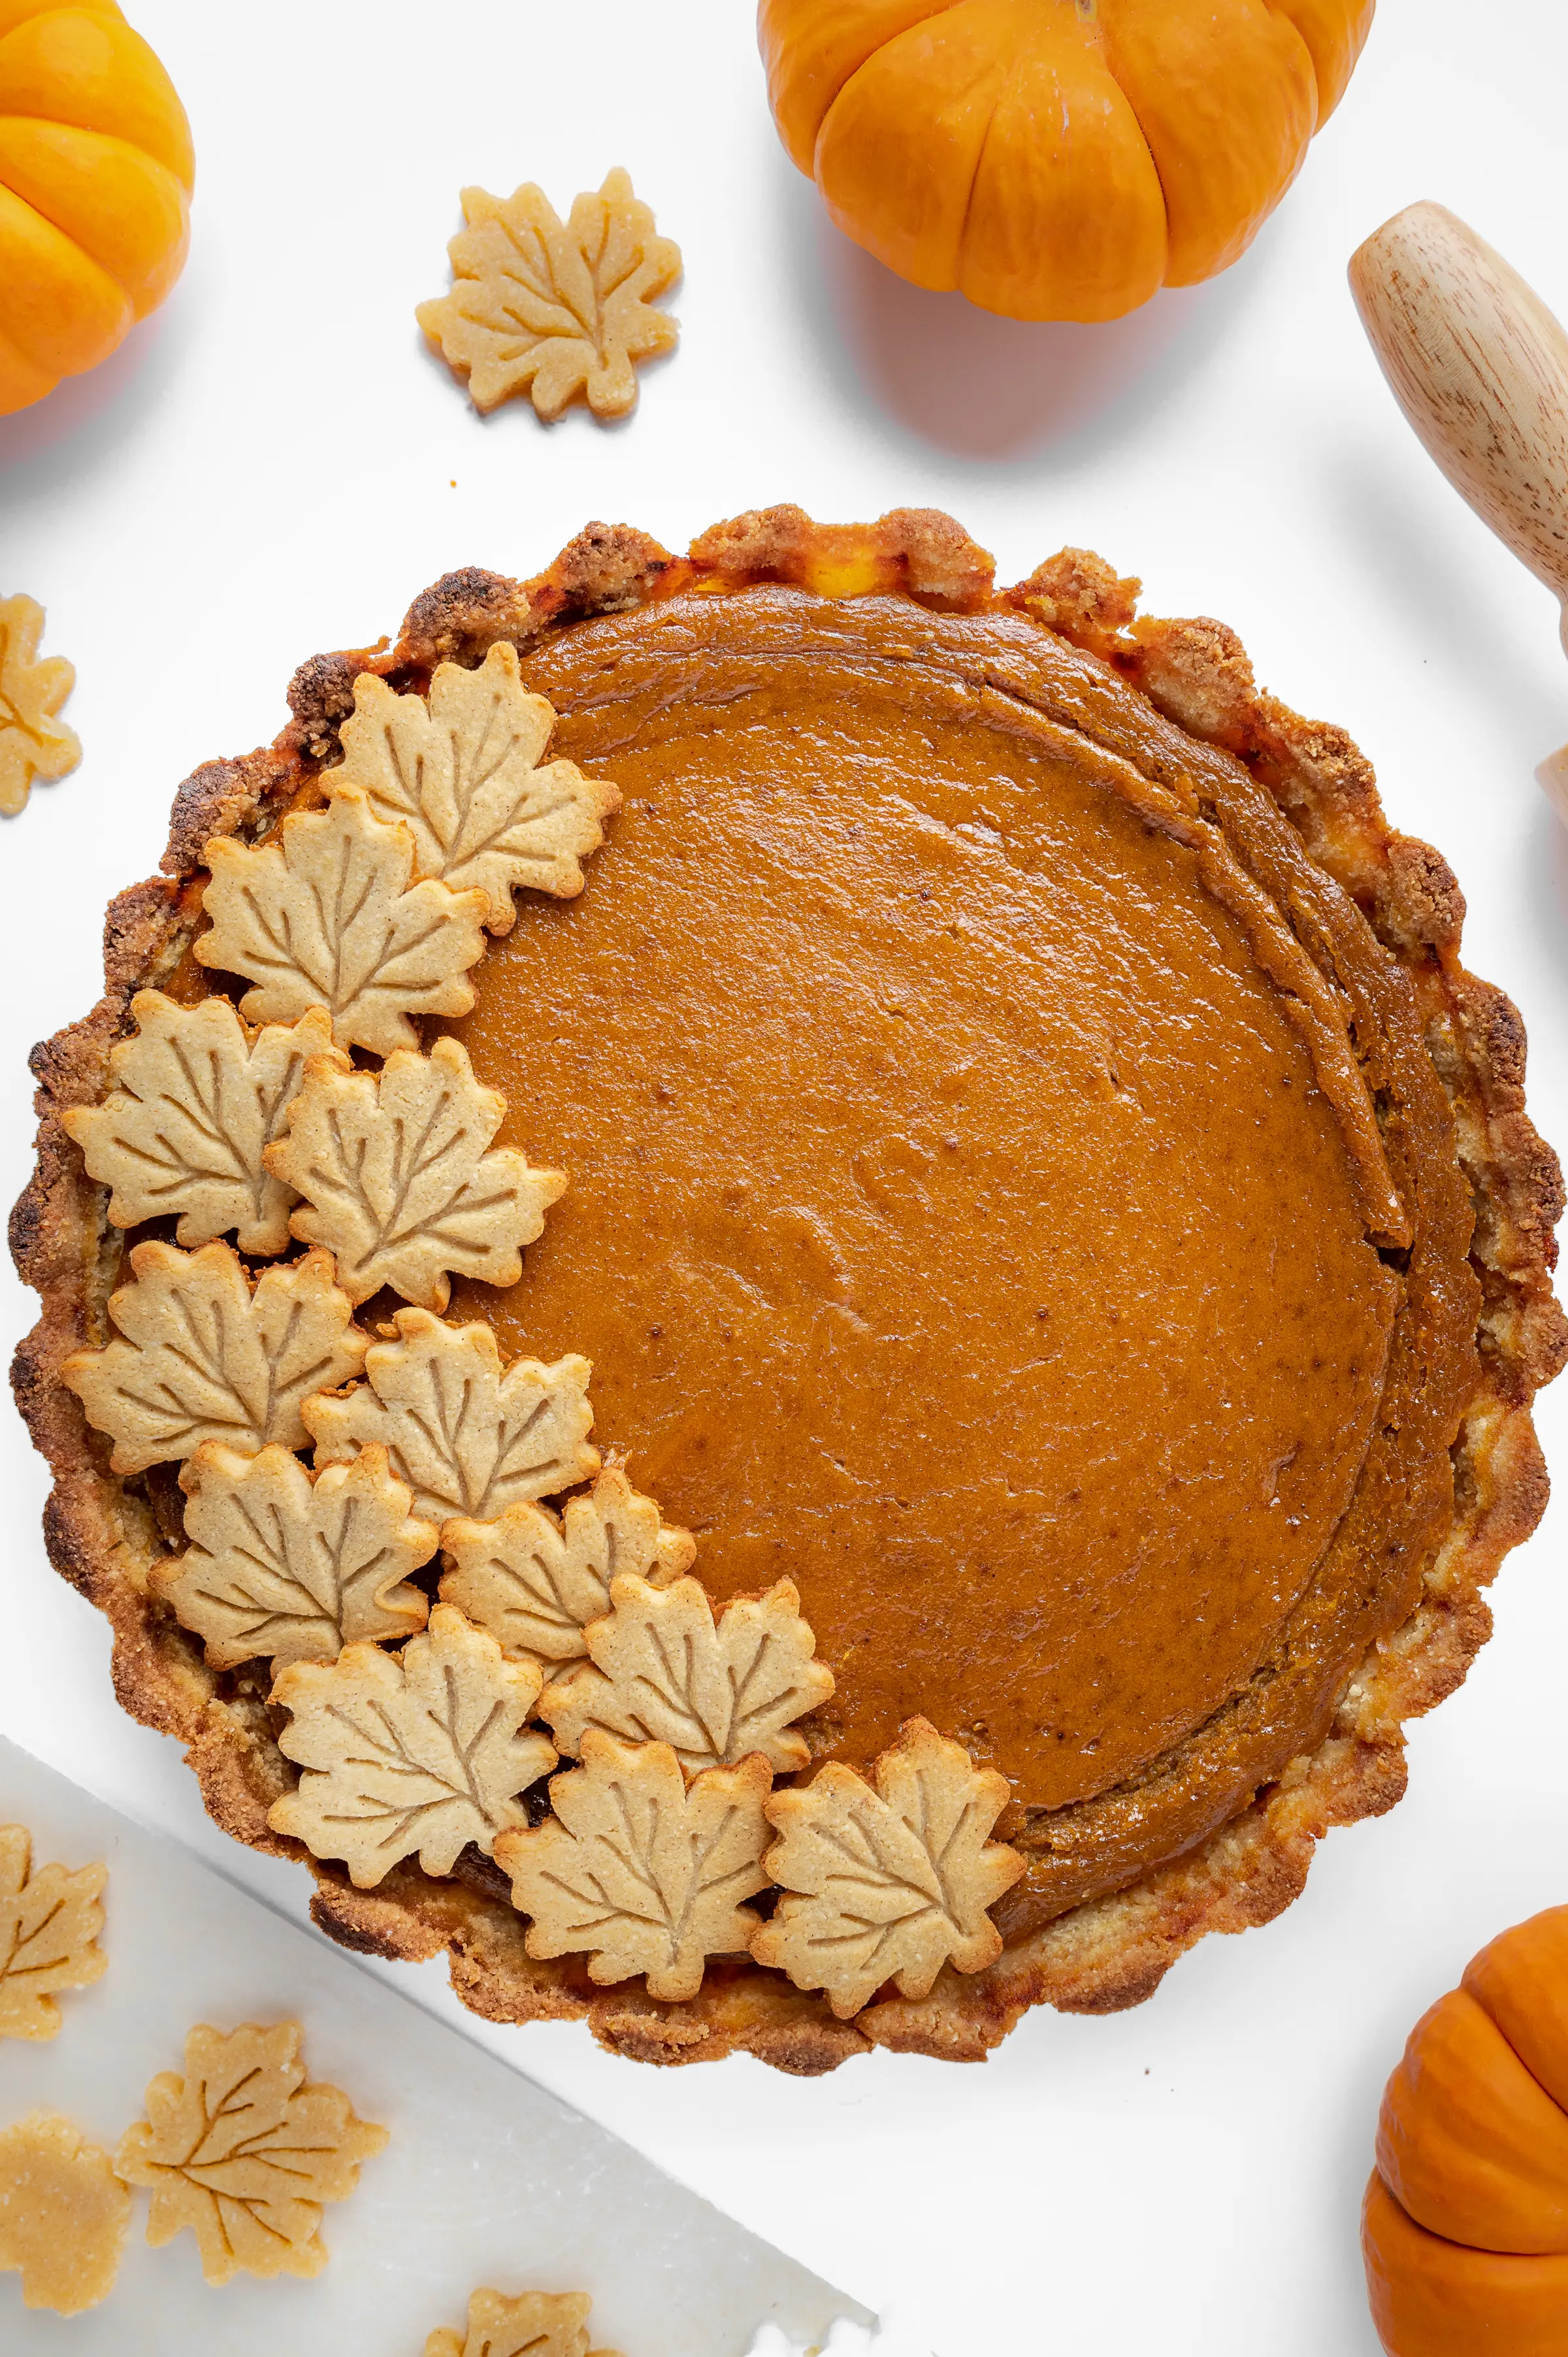 Top down view of a sugar free pumpkin pie, with maple leaf-shaped sugar cookies decorating one side.